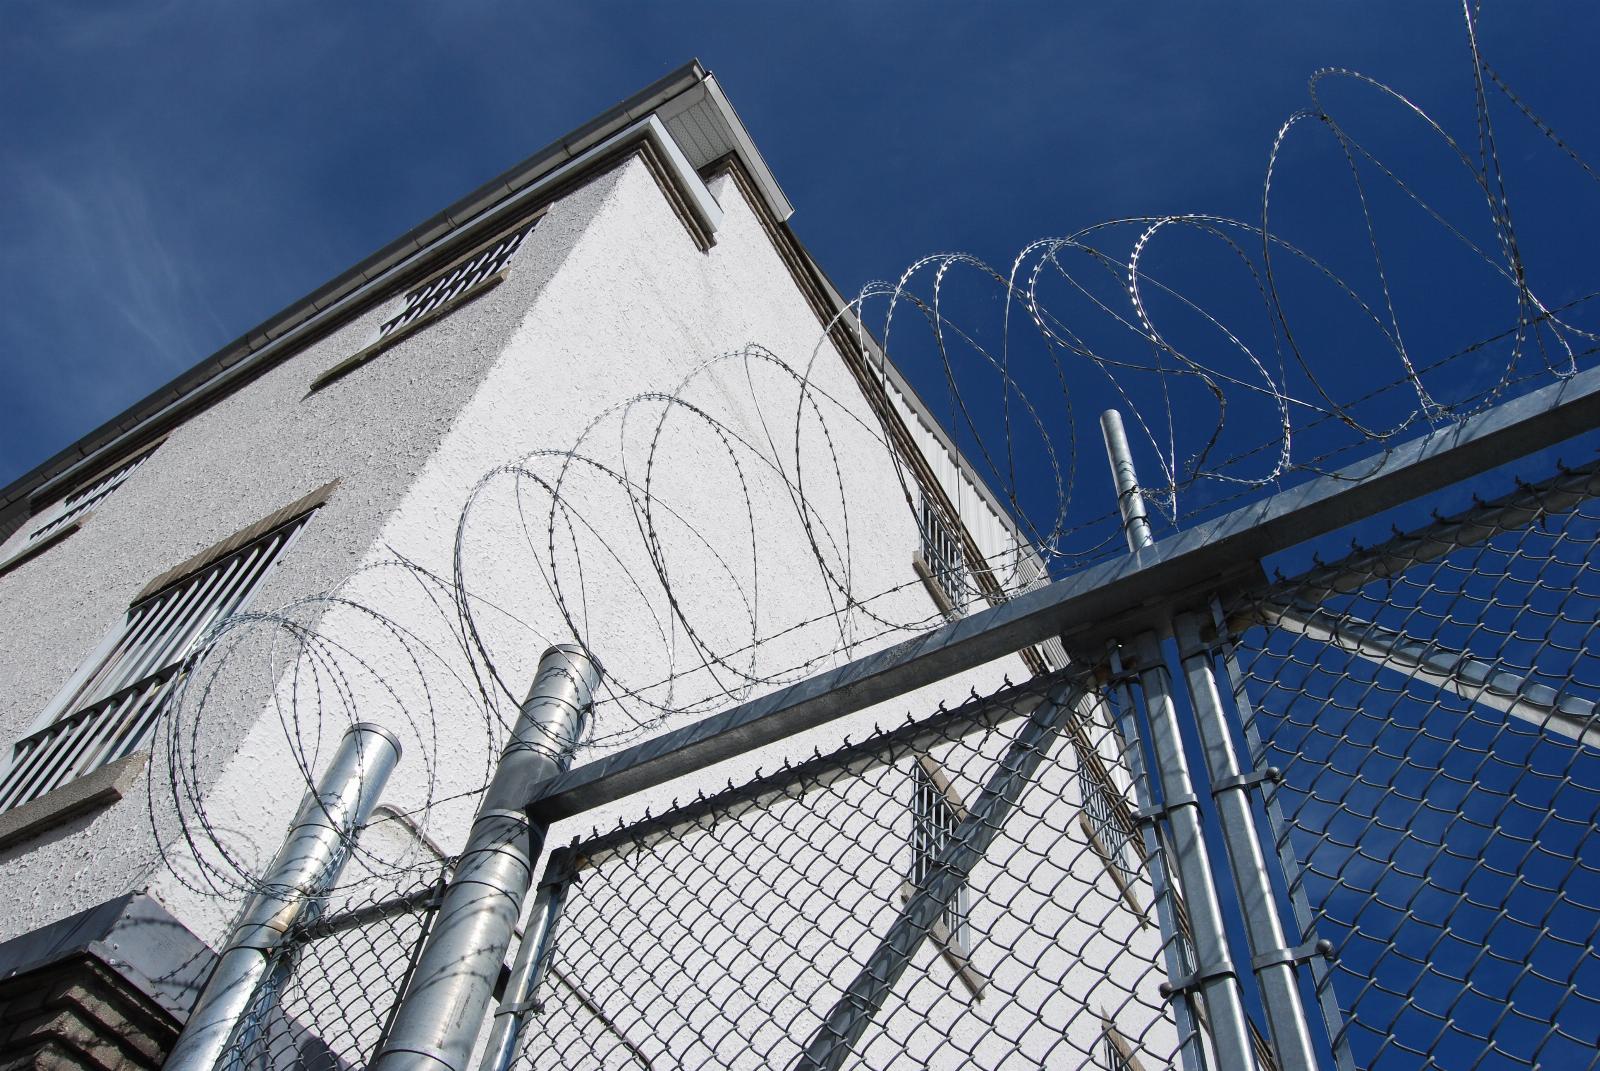 The Worst Prisons in the U.S. Have the Most Smuggled Cellphones